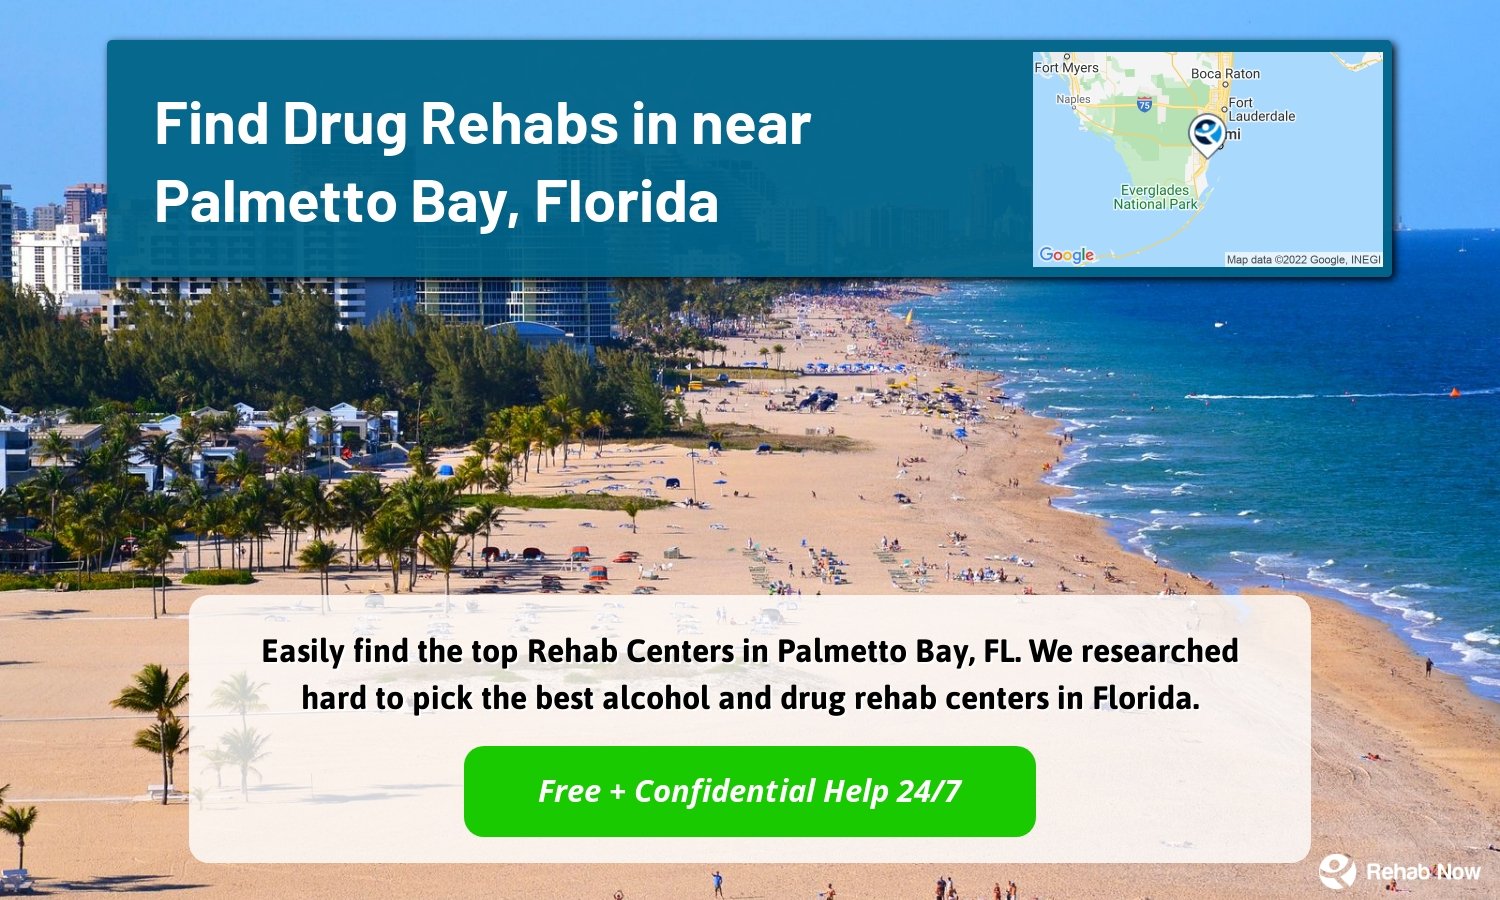 Easily find the top Rehab Centers in Palmetto Bay, FL. We researched hard to pick the best alcohol and drug rehab centers in Florida.